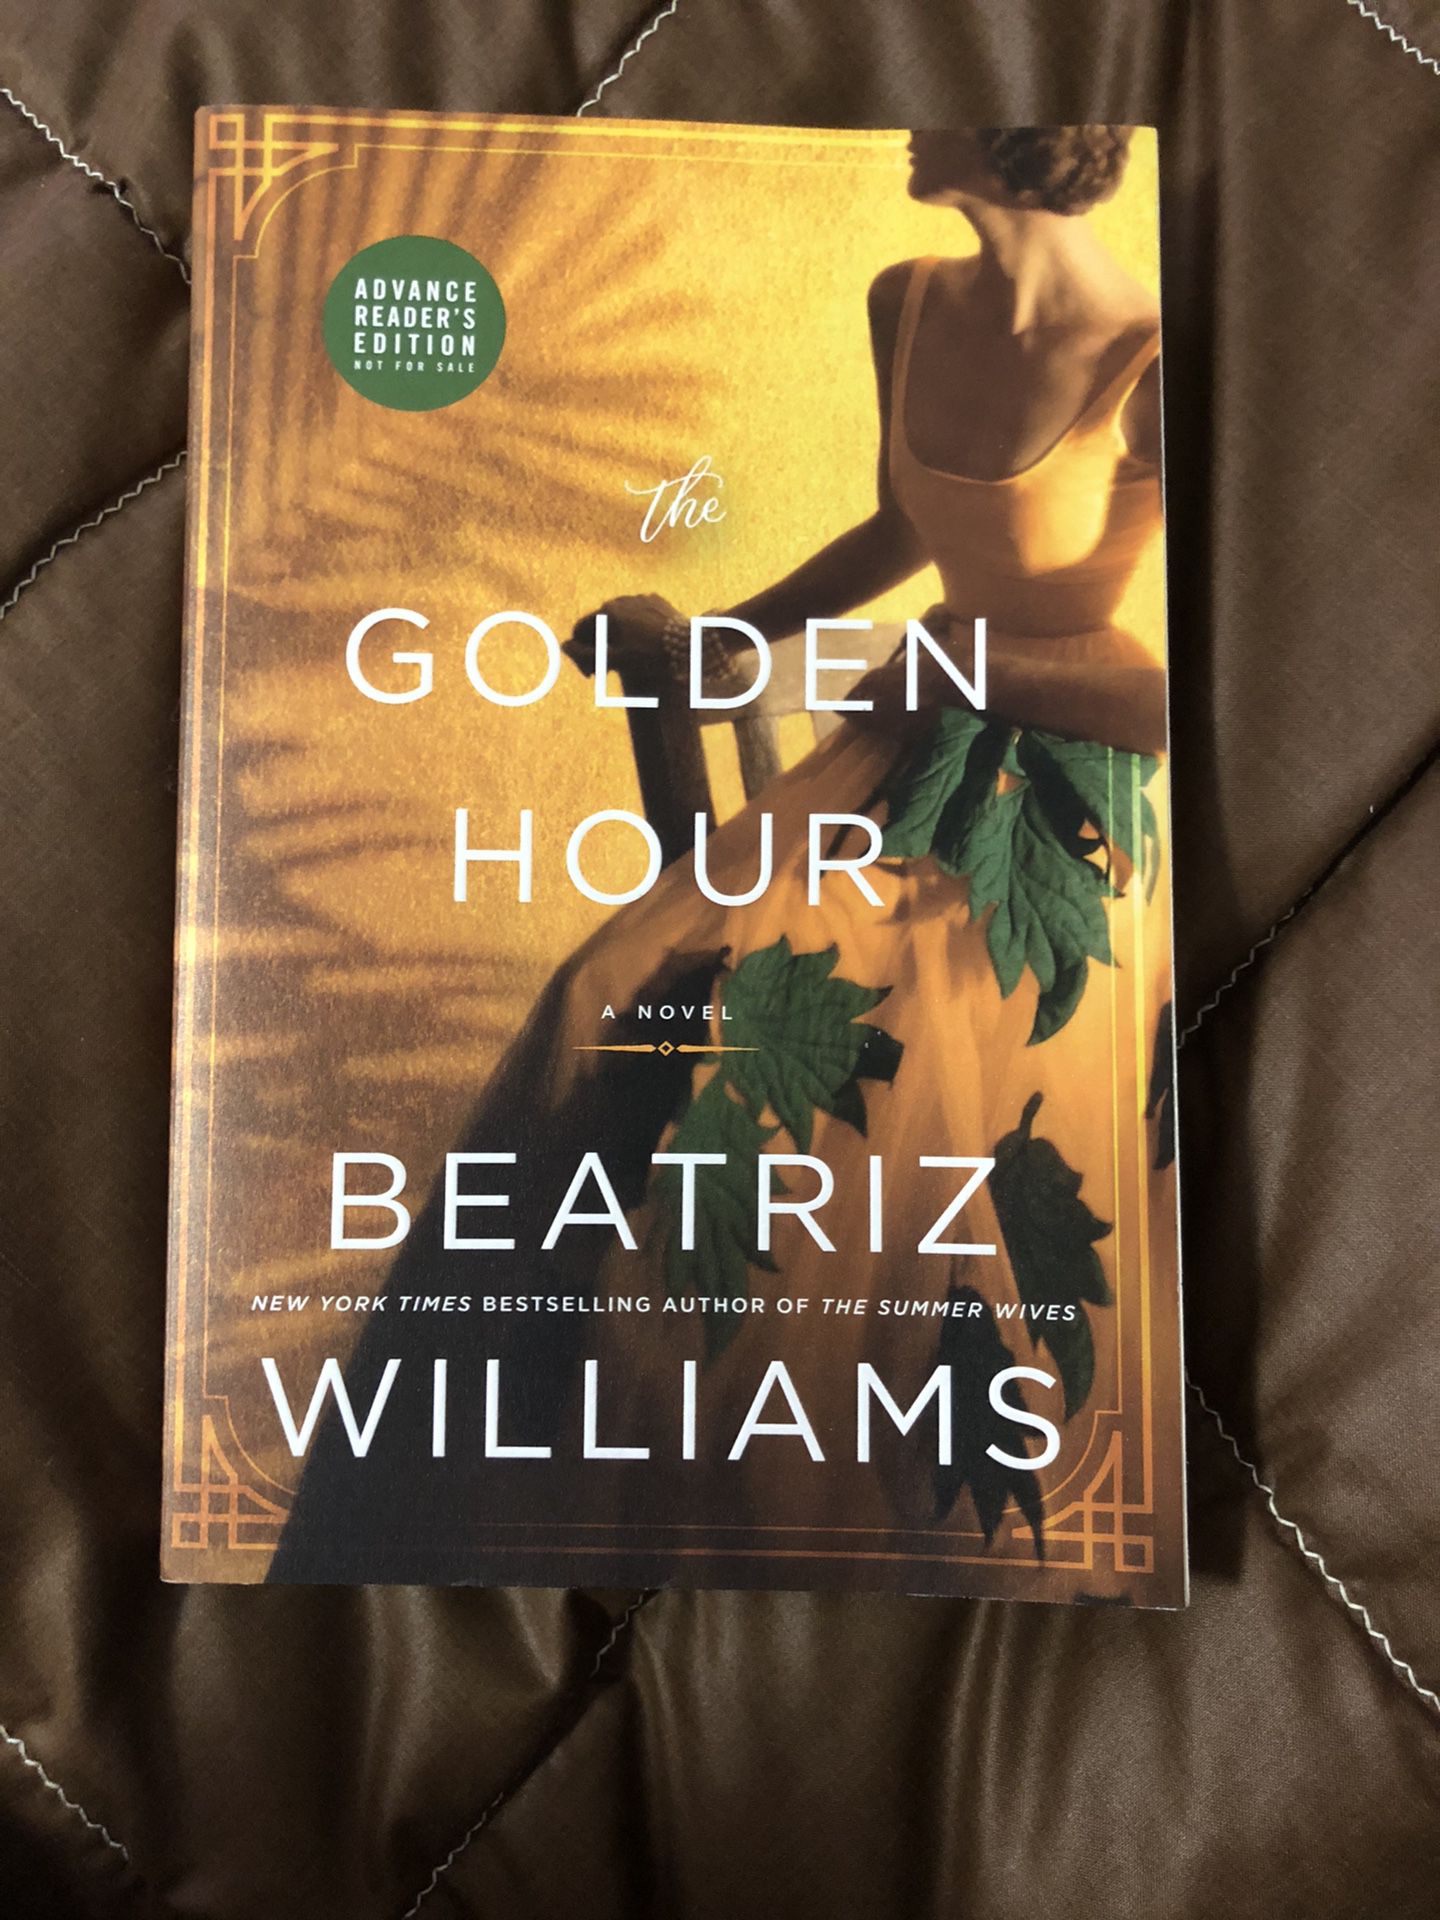 The Golden Hour by Beatriz Williams (paperback)